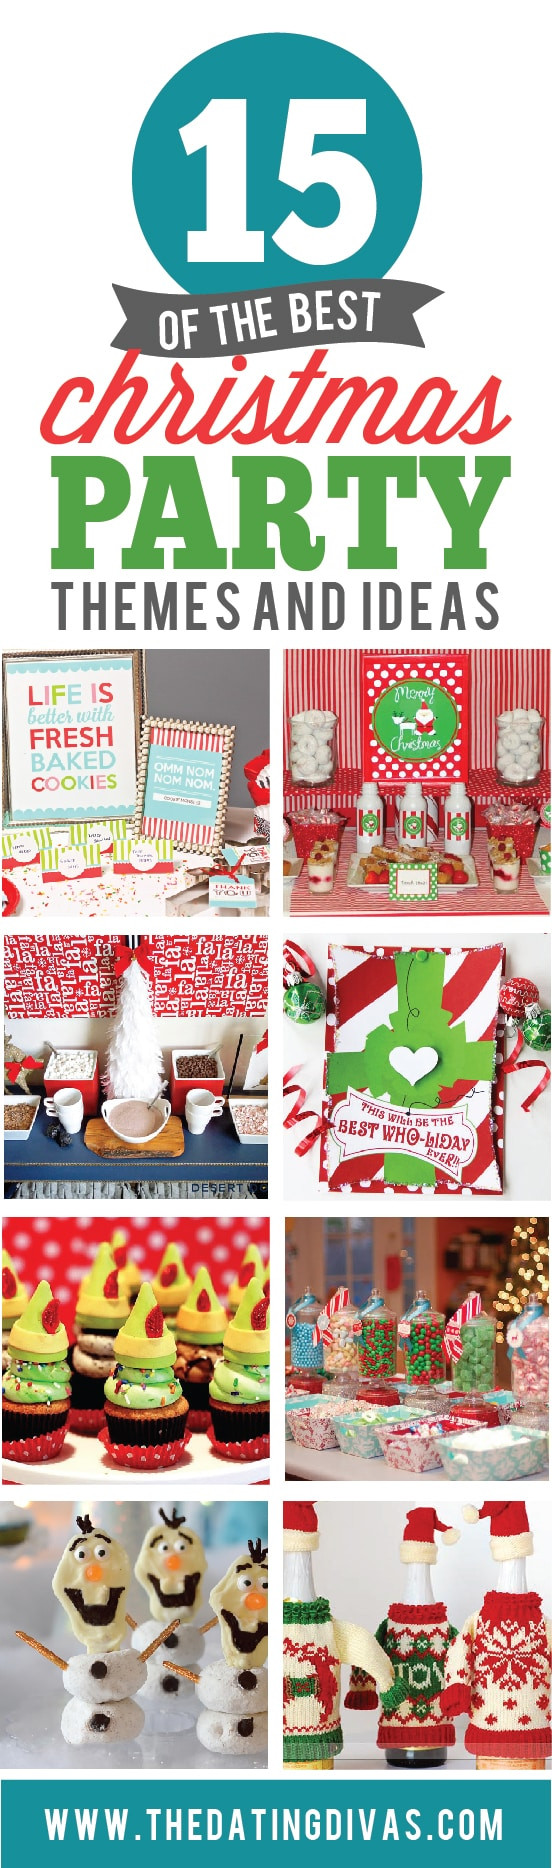 Holiday Party Theme Ideas
 15 Christmas Party Themes